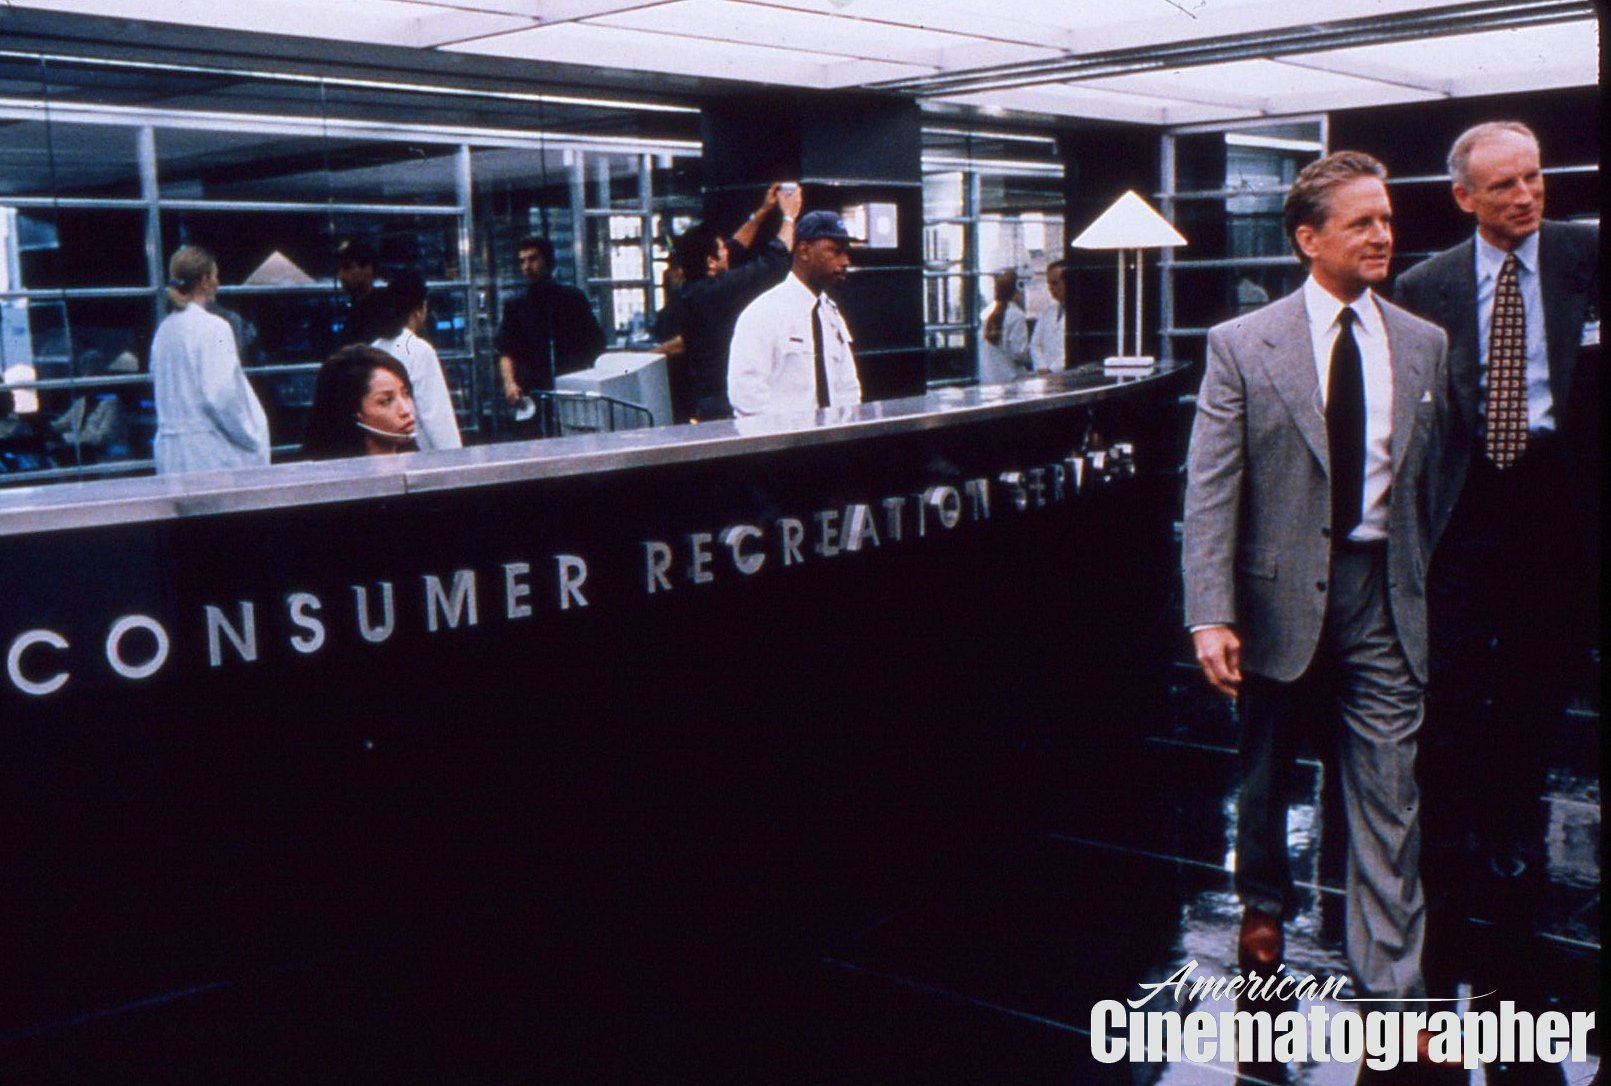 The Consumer Recreation Services (CRS) set was built in an actual San Francisco office space.